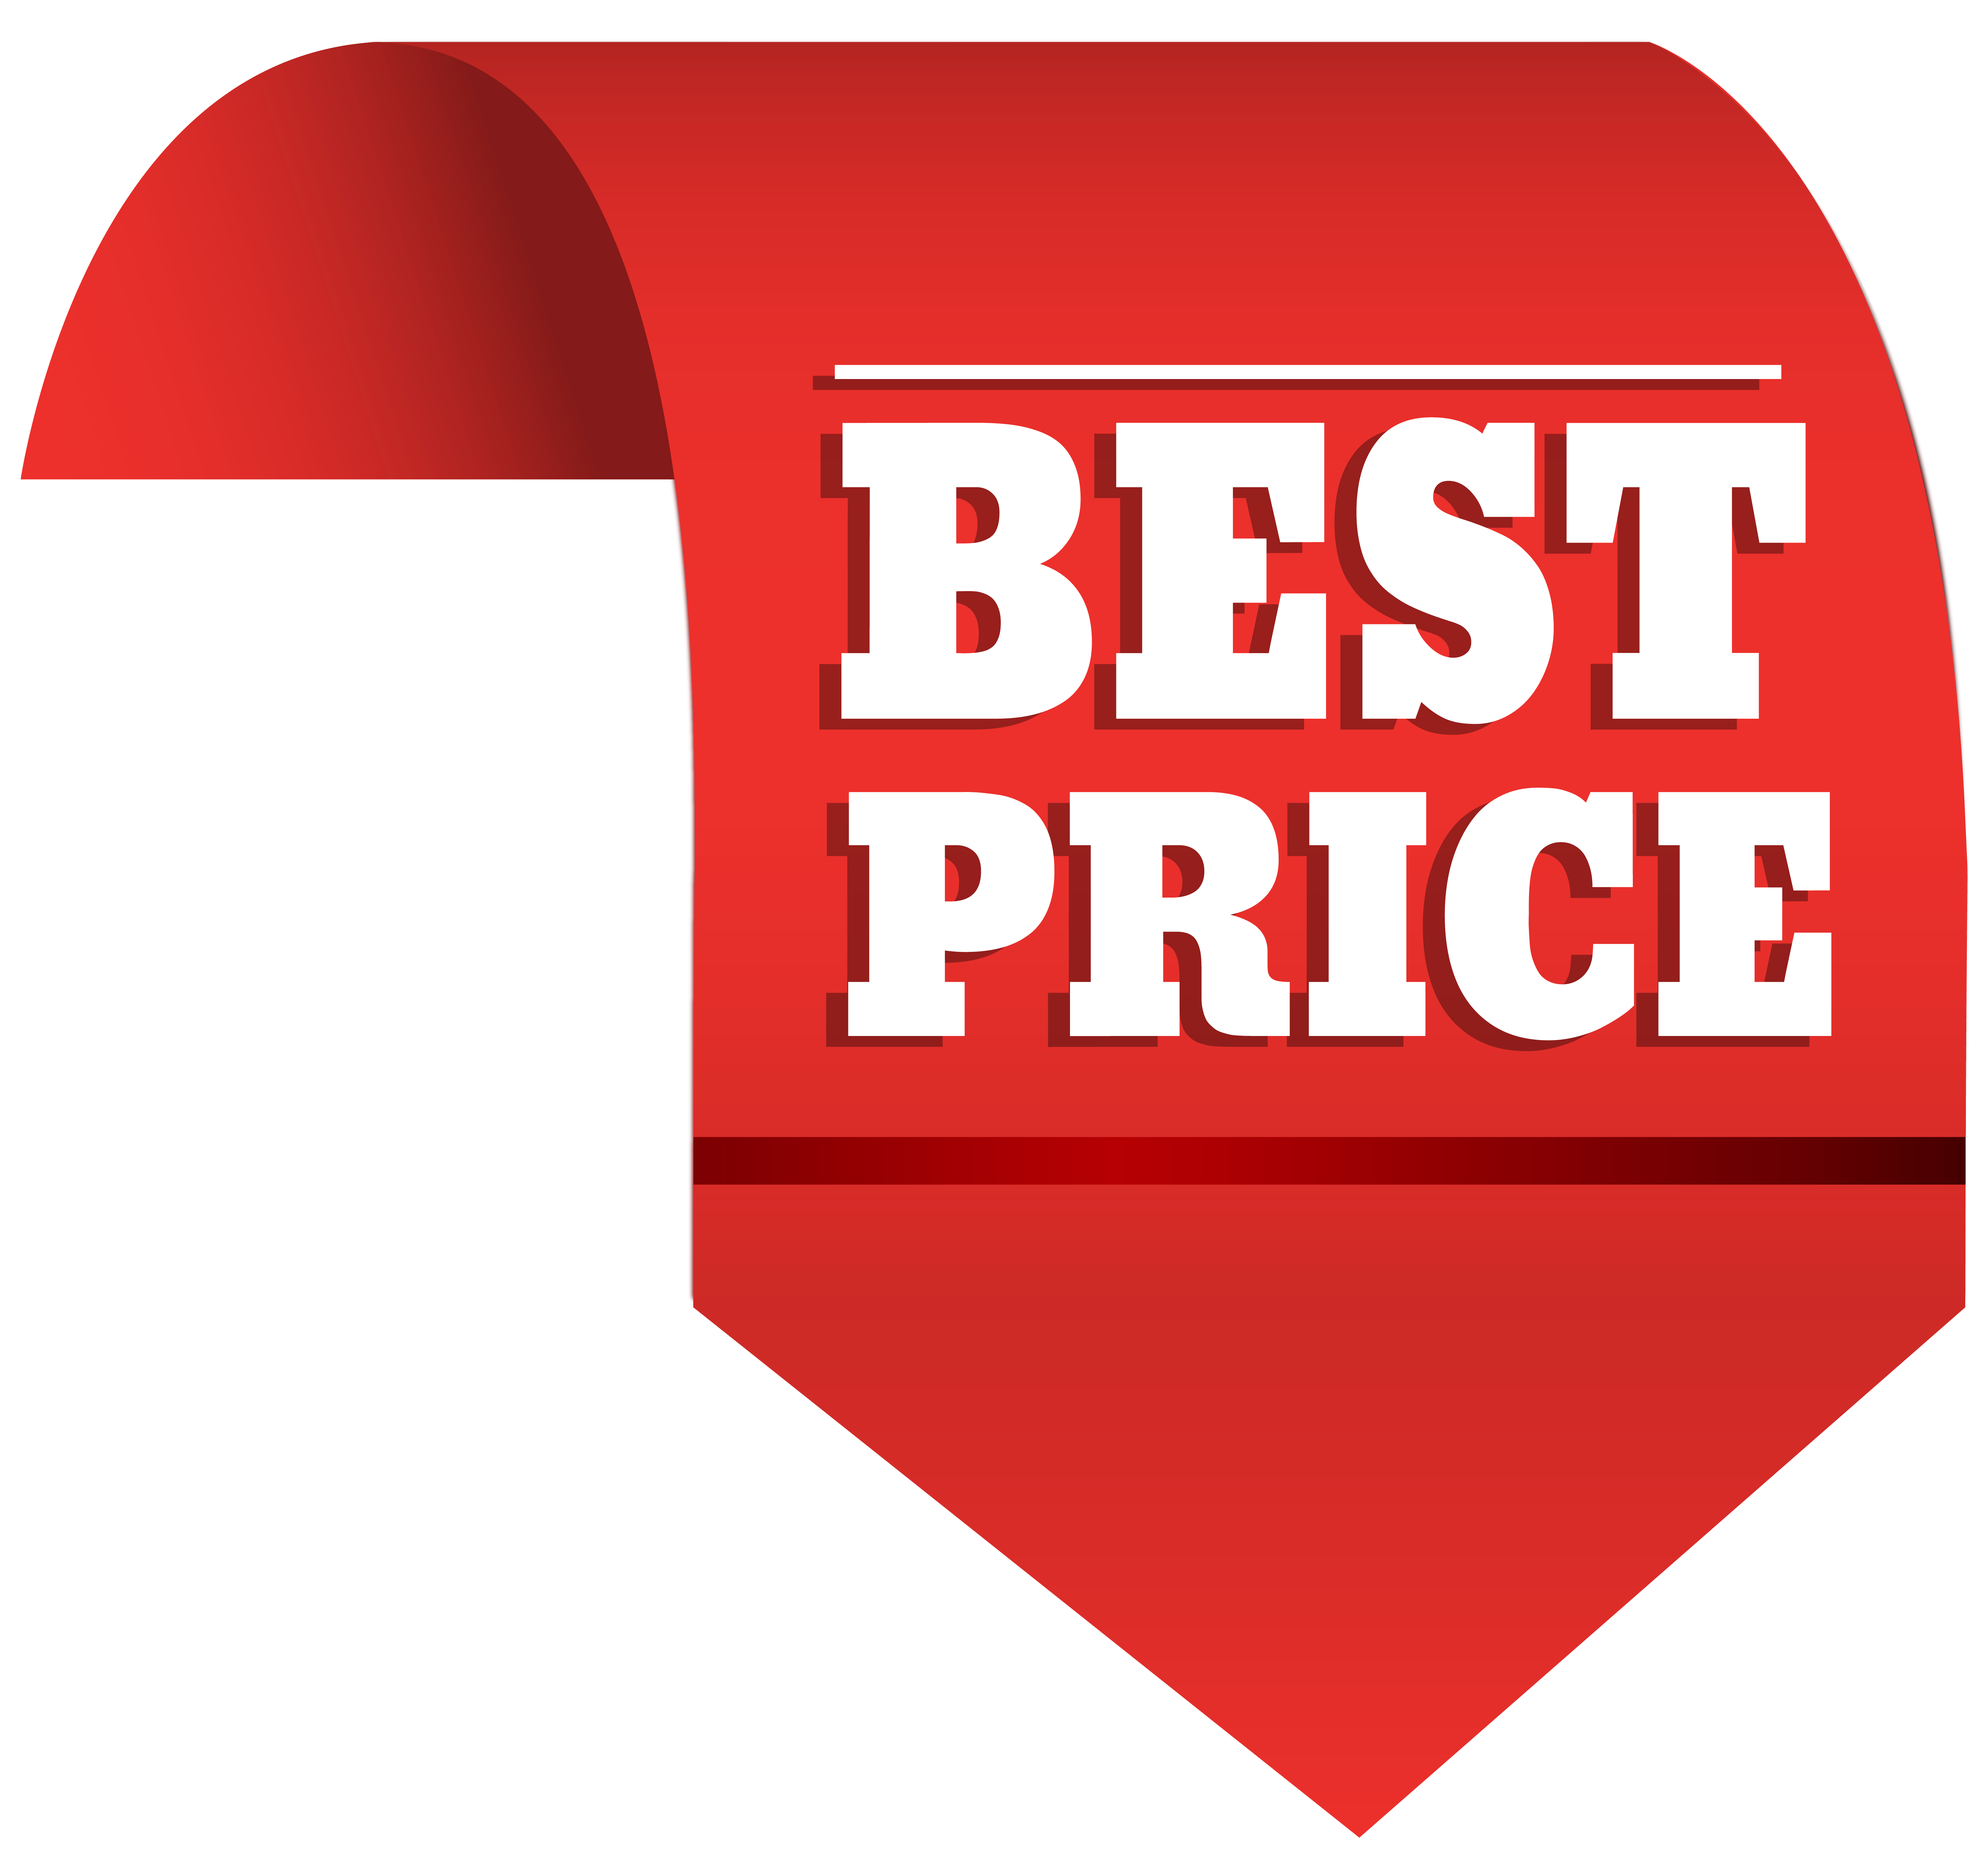 Price Tag PNG Transparent Picture